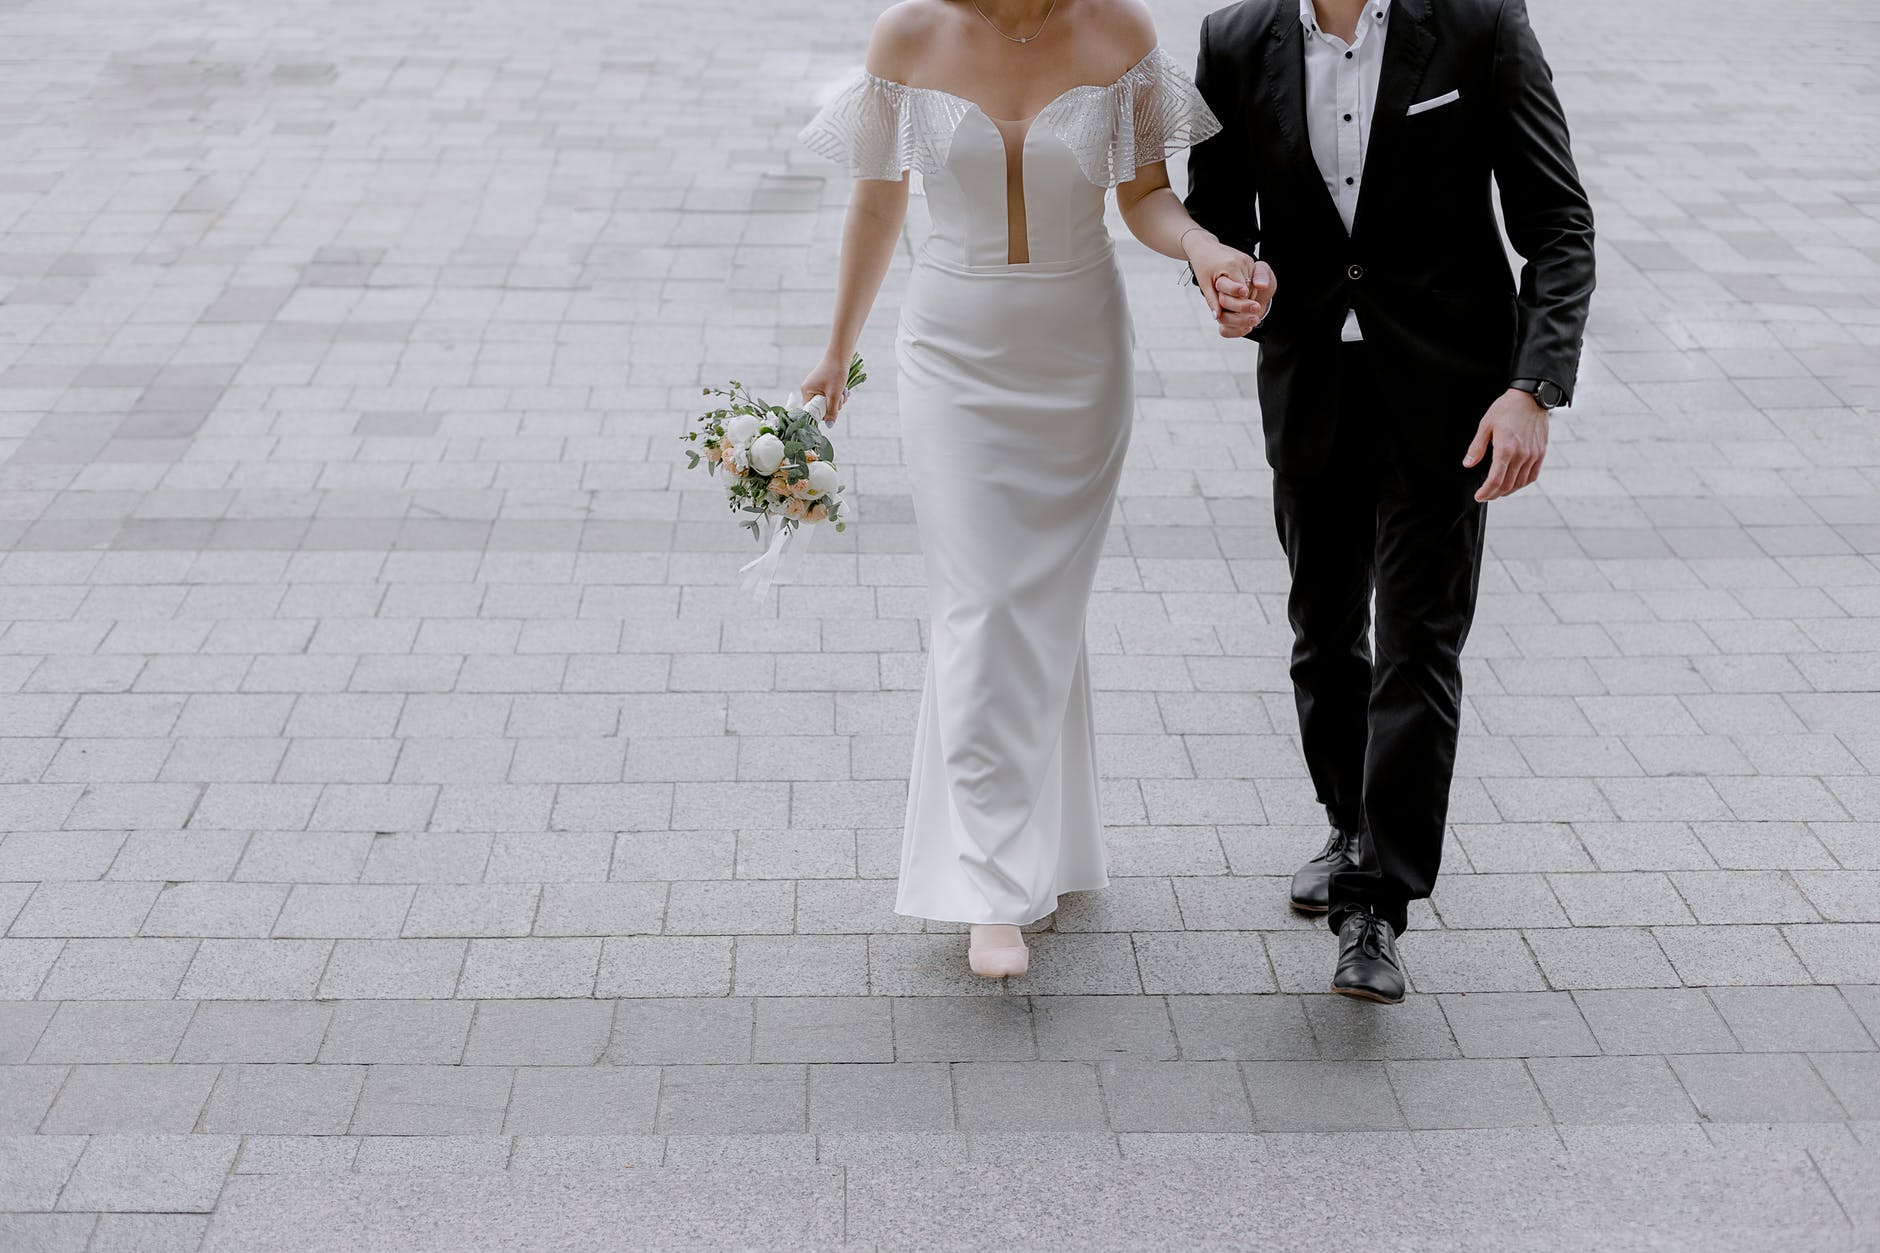 man in black suit holding hand of woman in white wedding dress